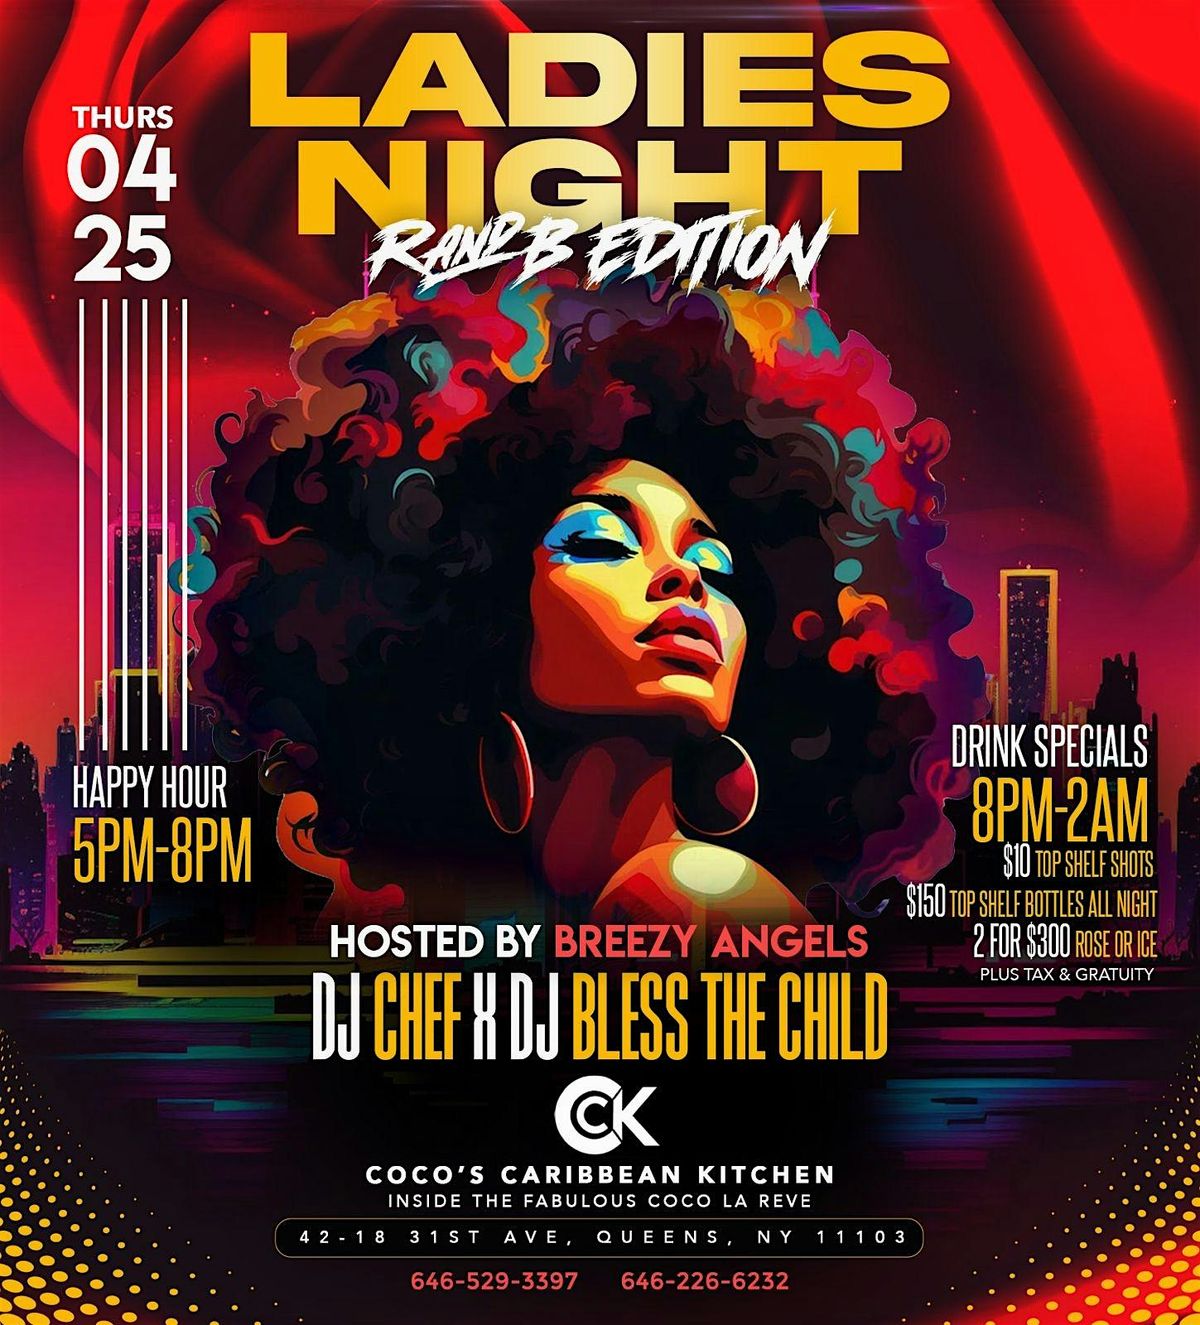 Thurs. 04\/25: Ladies Night R&B Edition @ Coco's Caribbean Kitchen. RSVP Now